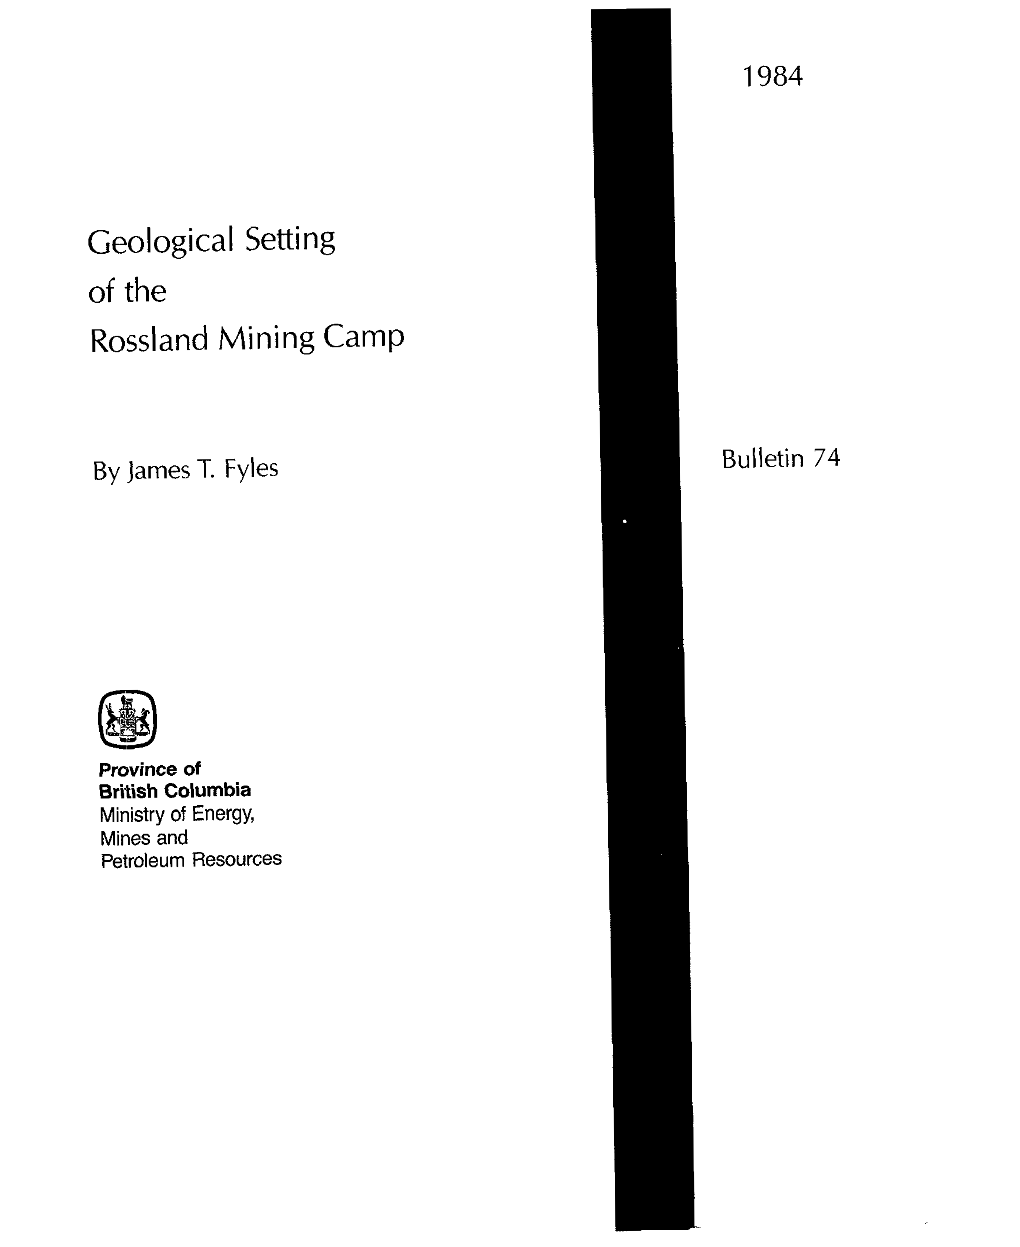 Geological Setting of the Rossland Mining Camp